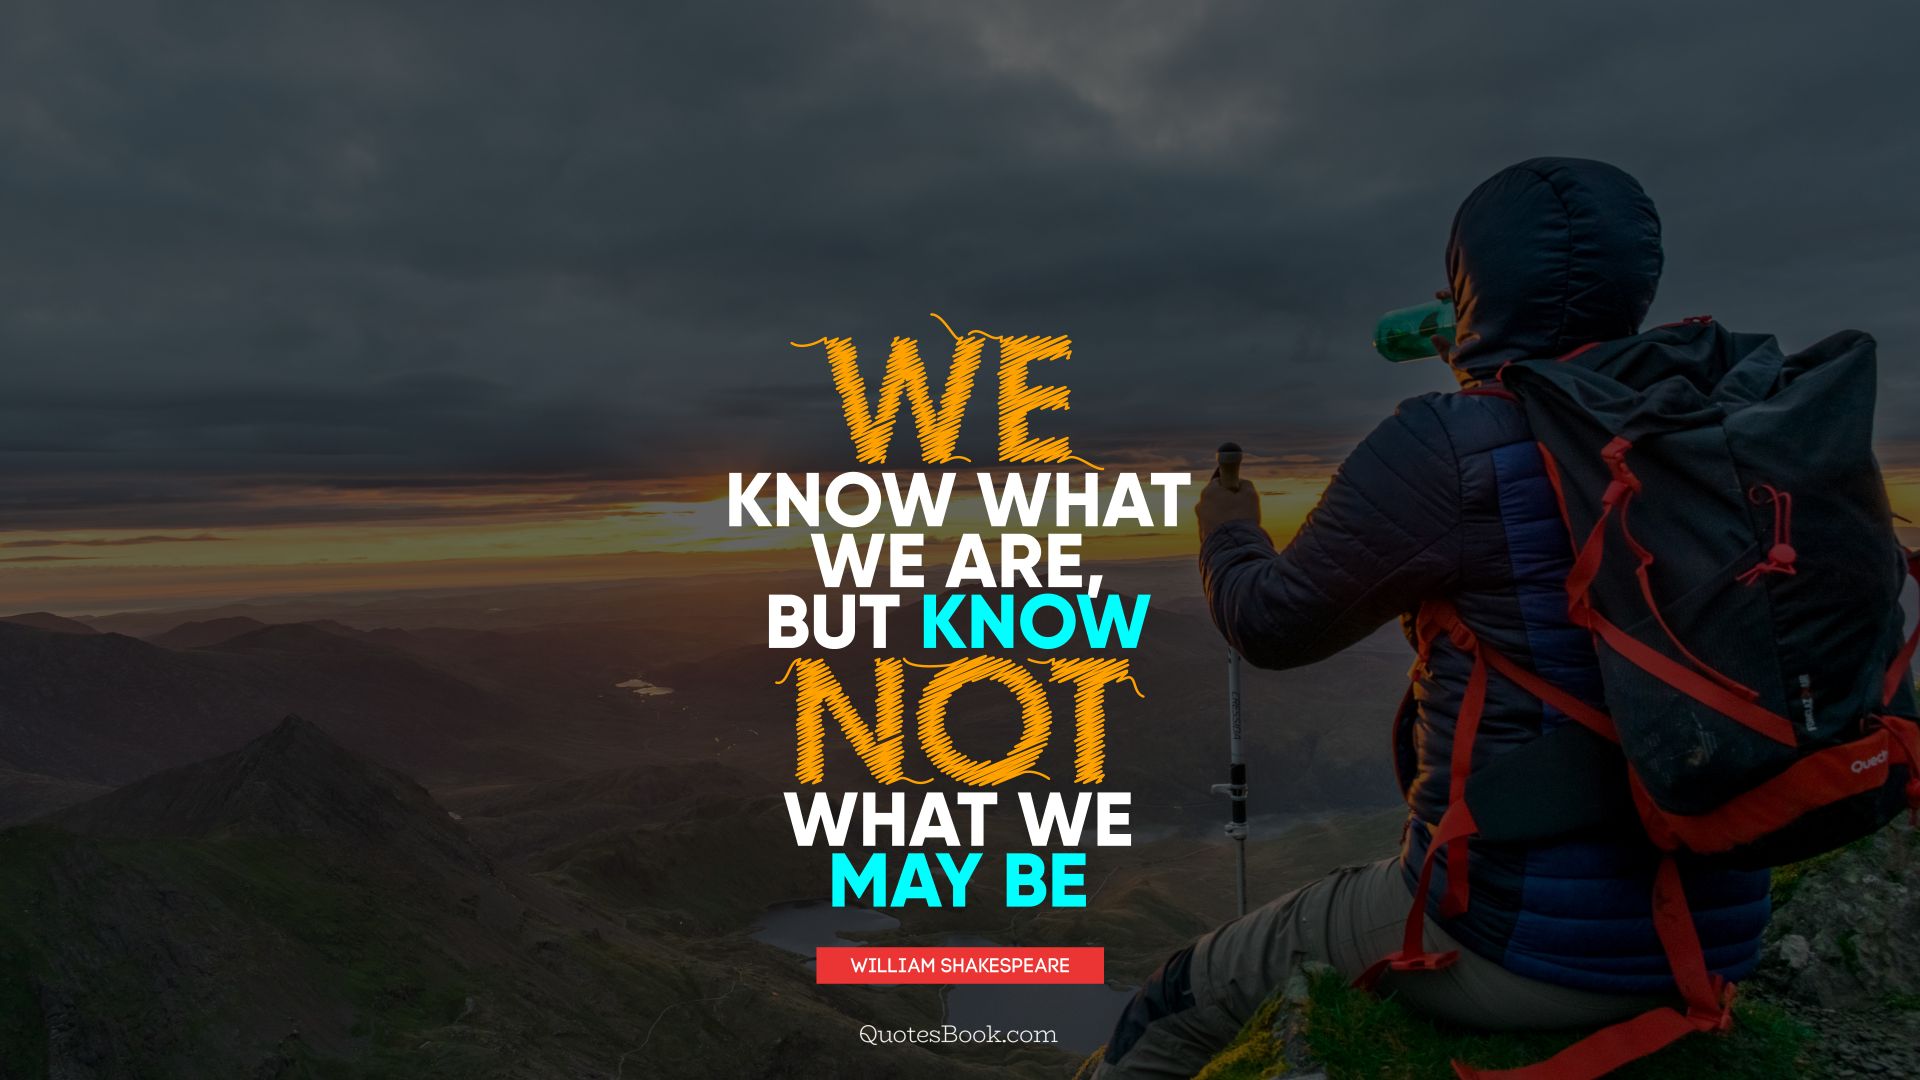 We know what we are, but know not what we may be. - Quote by William Shakespeare